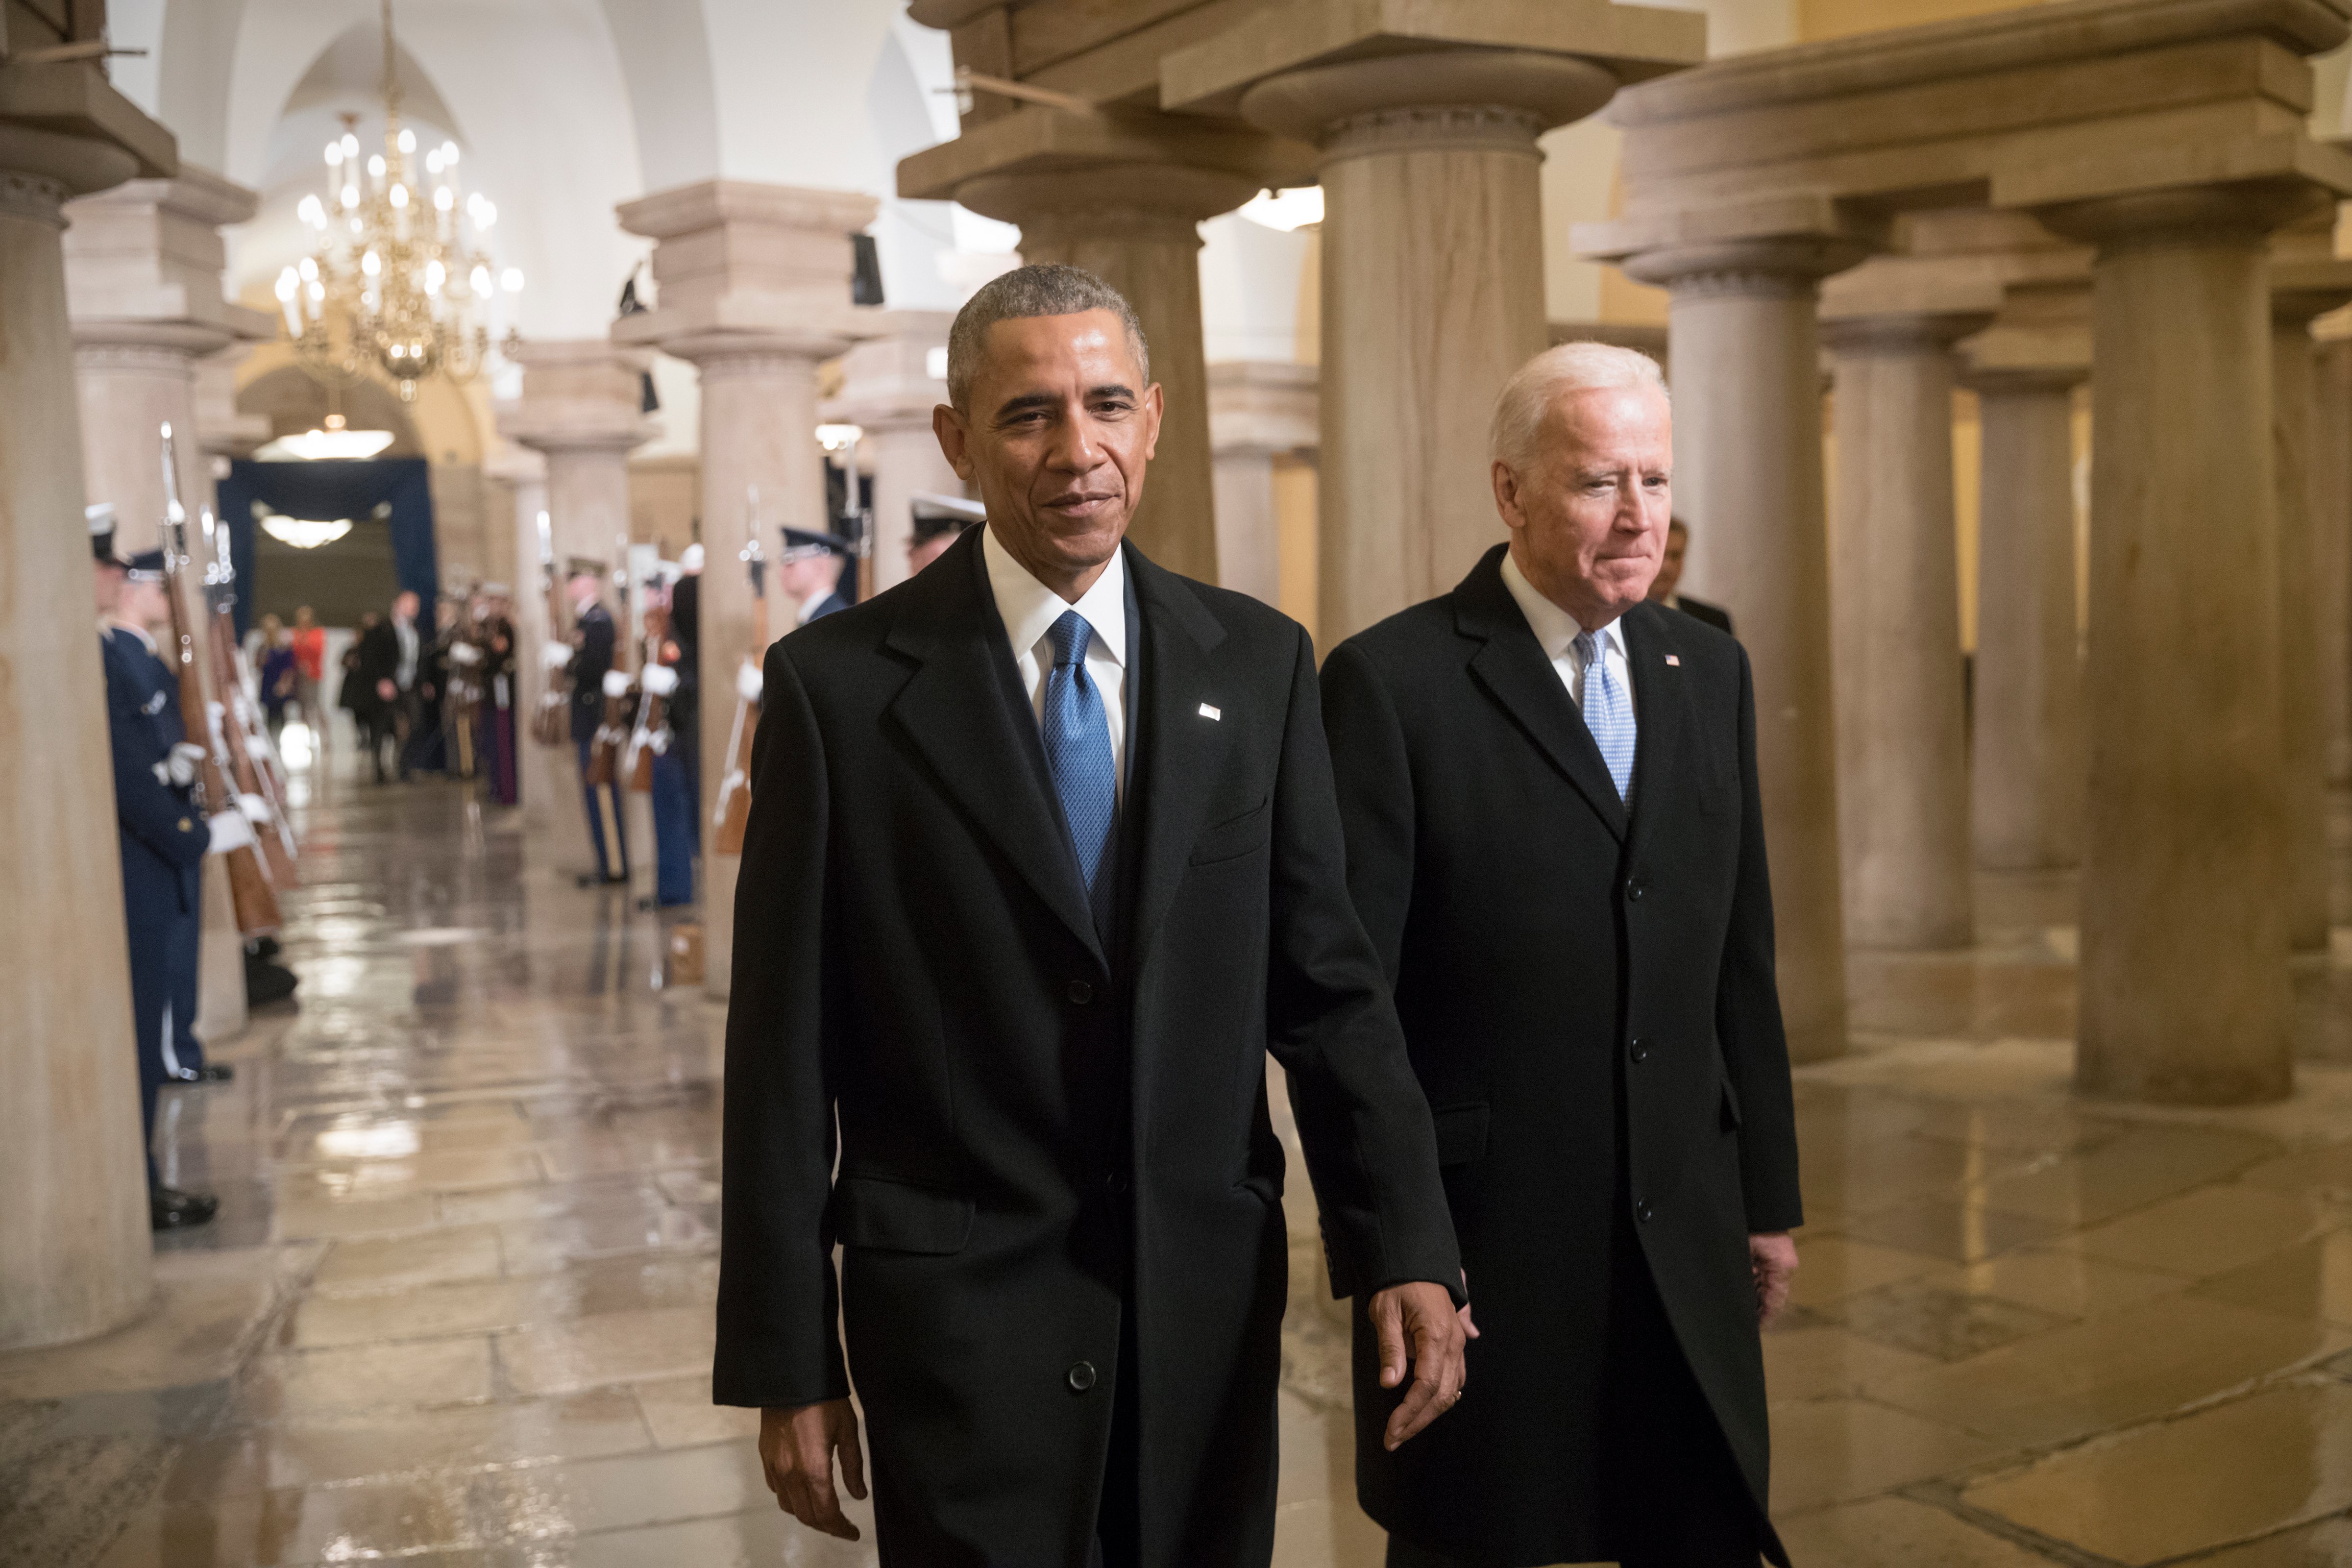 President Barack Obama and Vice President Joe Biden walk through the Crypt of the Capitol for Donald Trump's inauguration ceremony, in Washington, January 20, 2017. (Photo by J. Scott Applewhite - Pool/Getty Images)